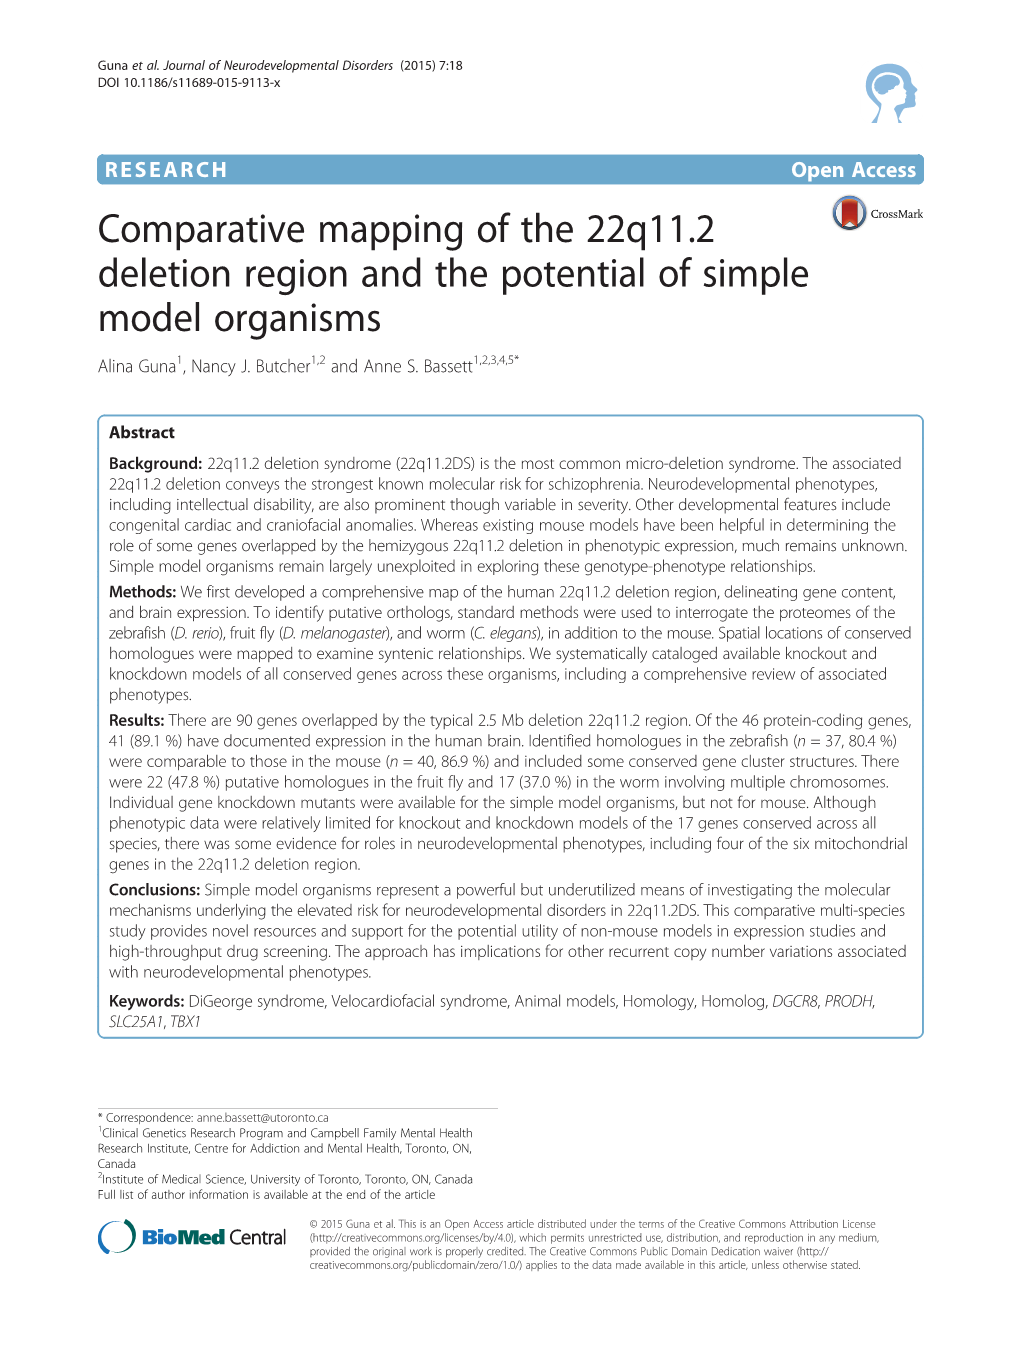 Comparative Mapping of the 22Q11. 2 Deletion Region and the Potential of Simple Model Organisms